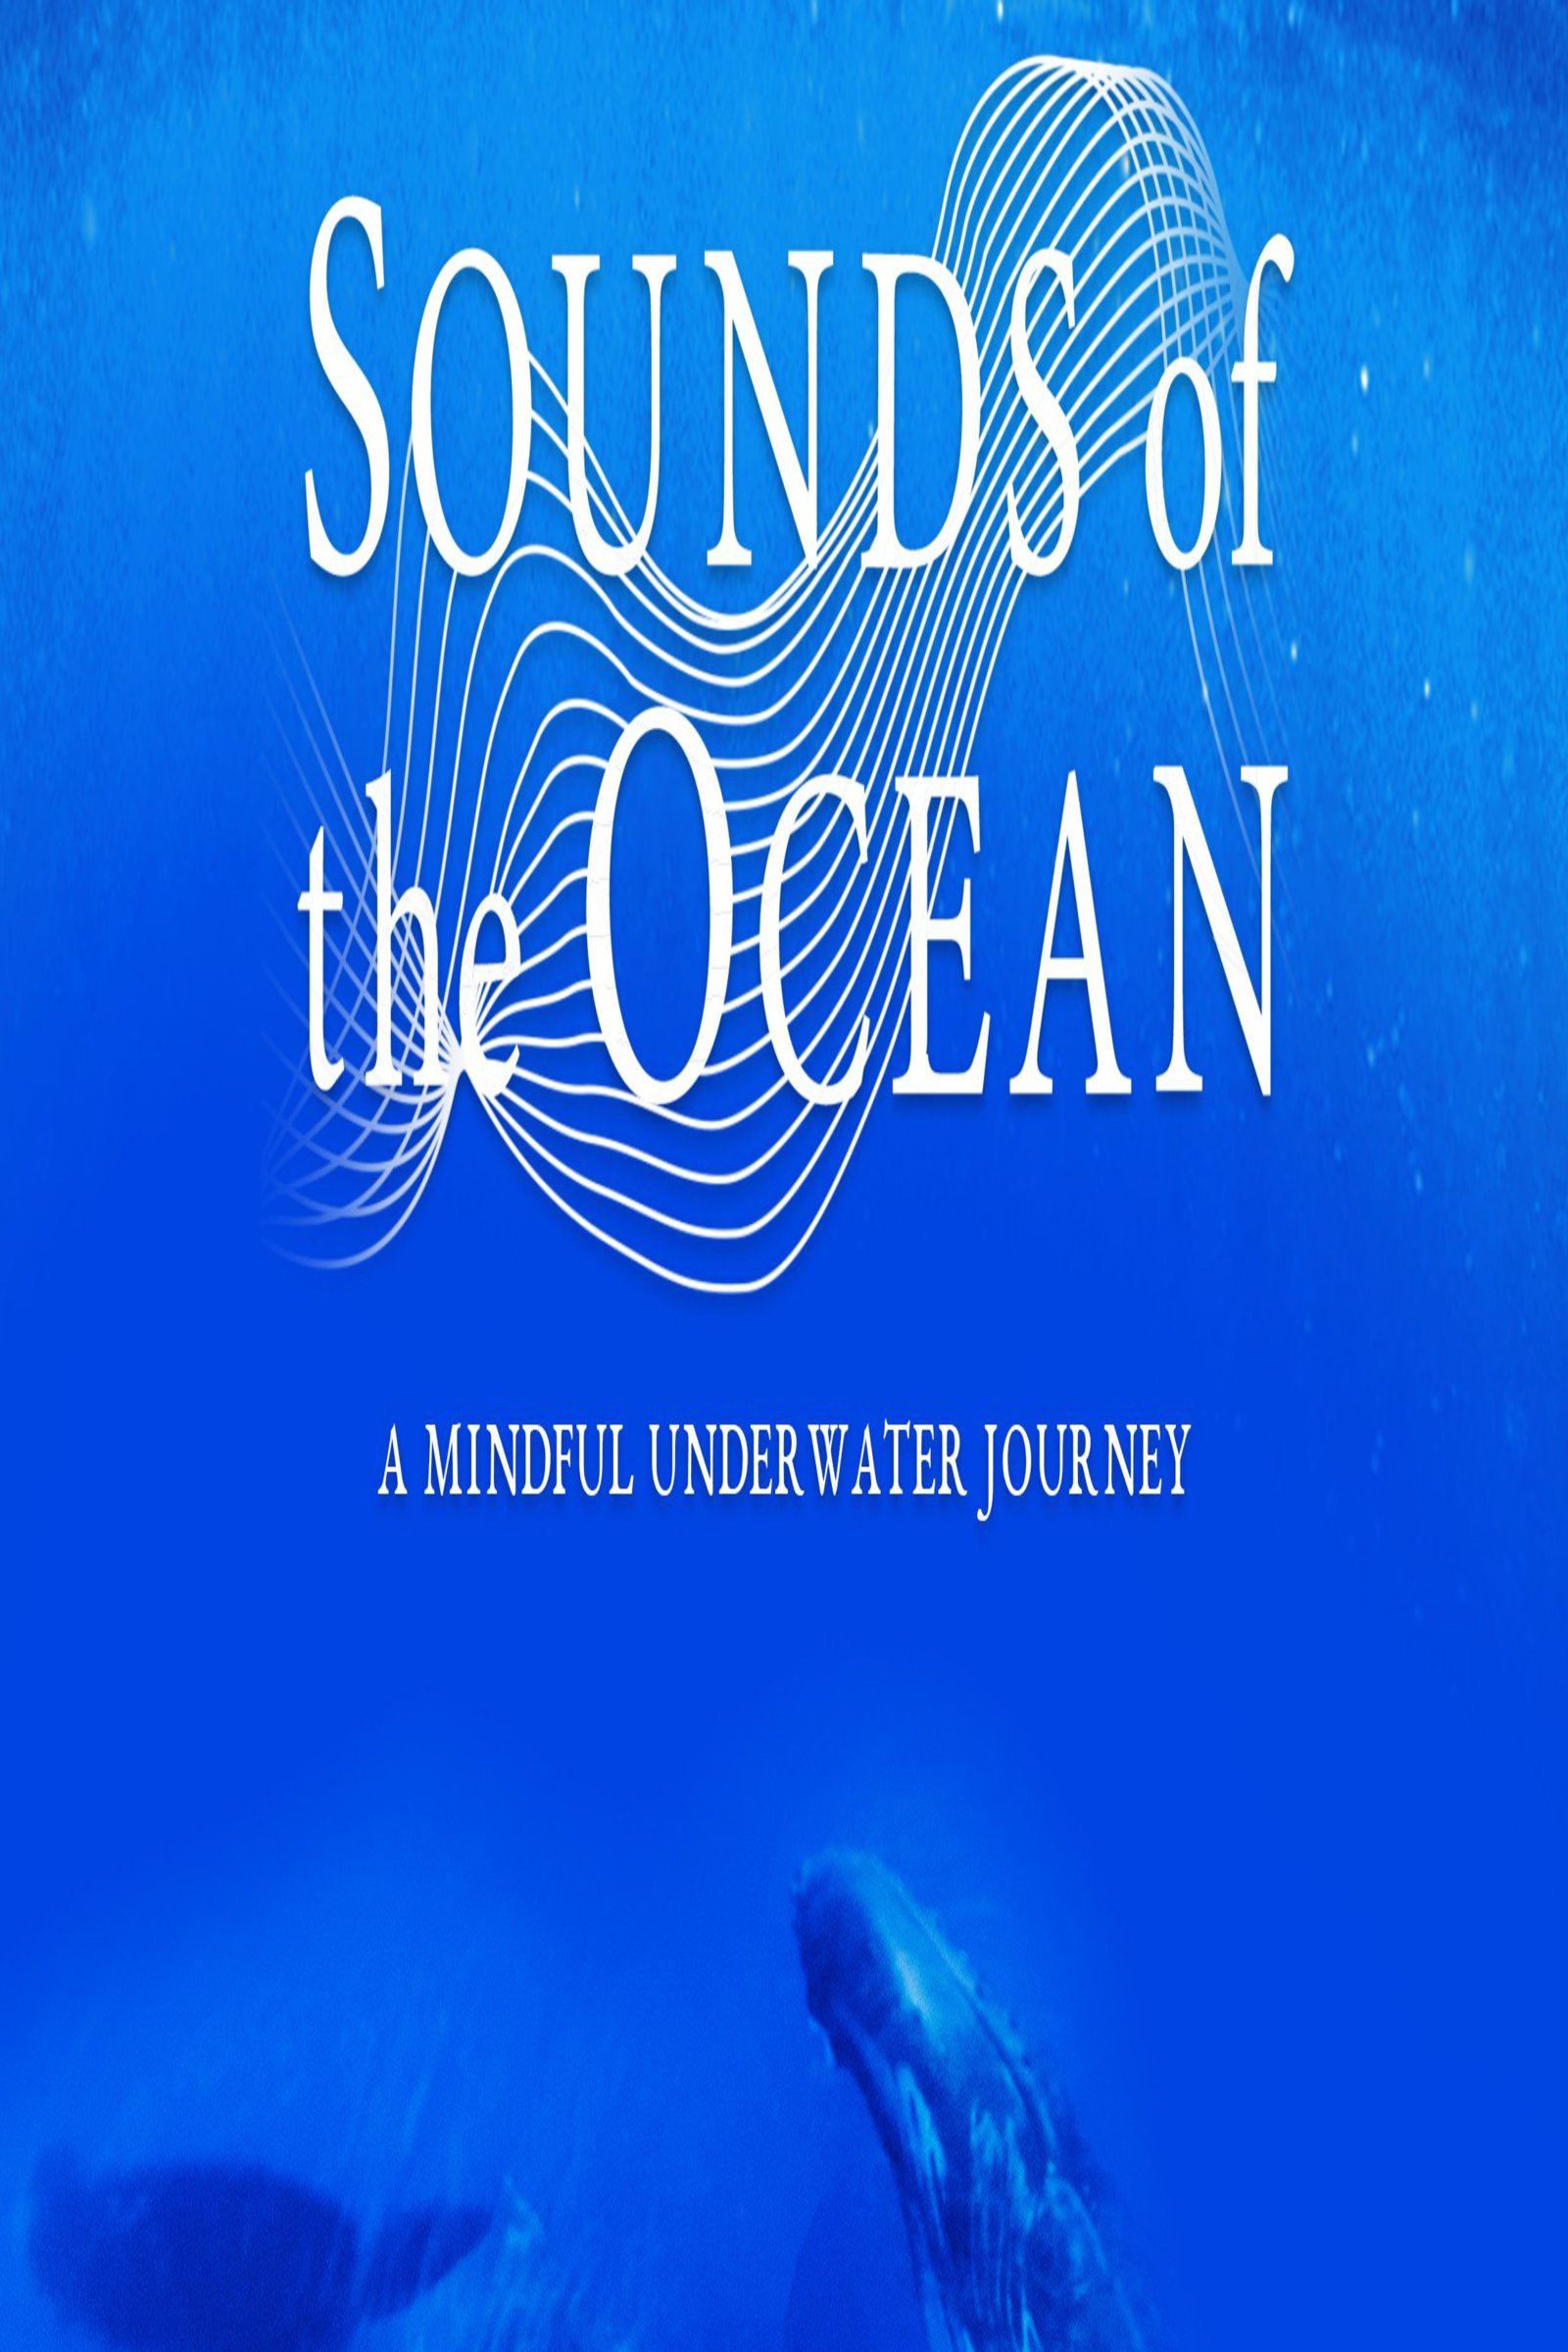 Sounds of the Ocean live